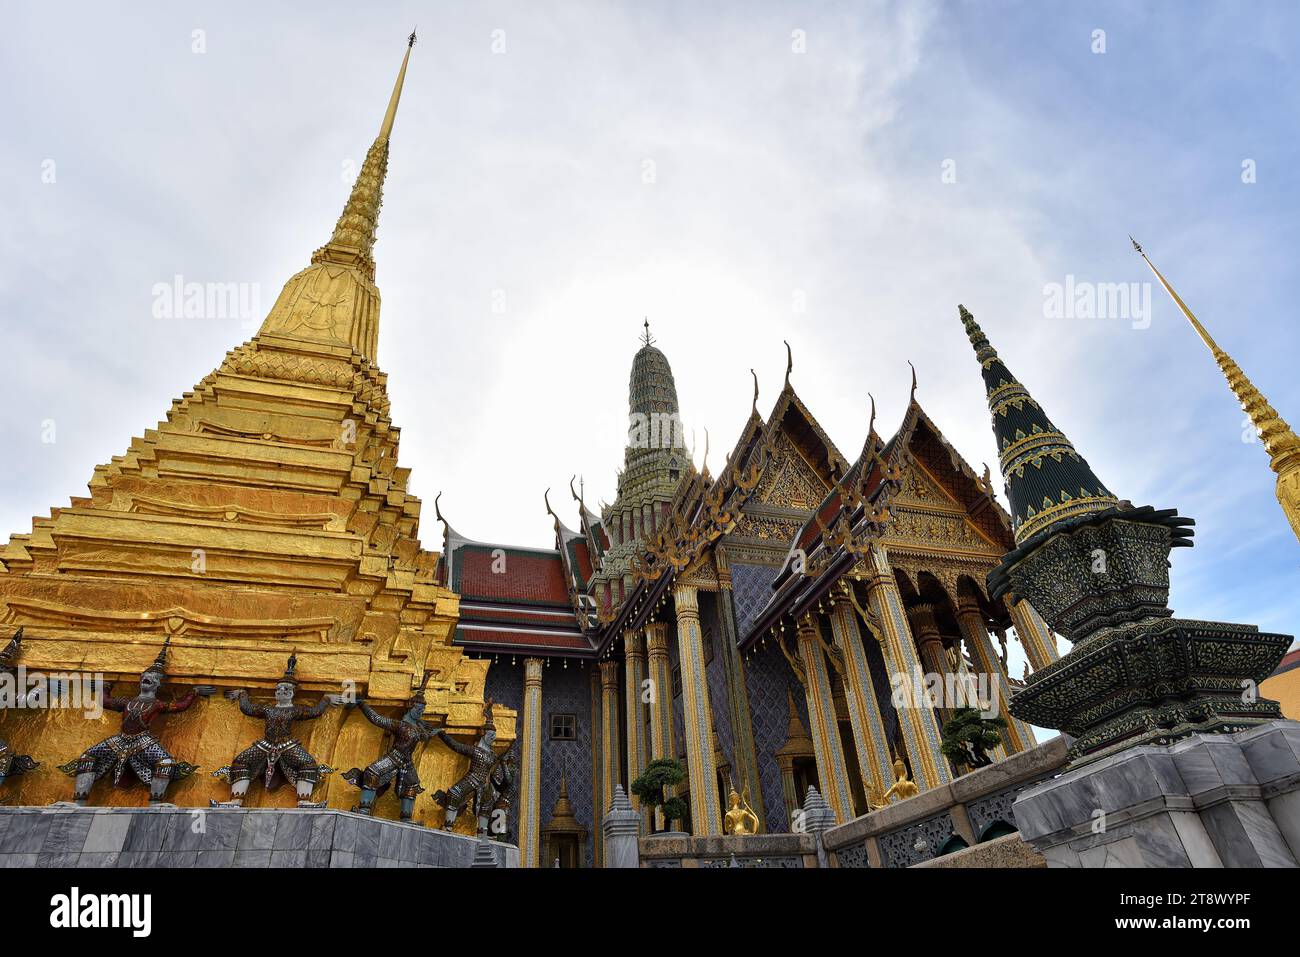 Prasat Phra Dhepbidorn or The Royal Pantheon, Grand Palace, Bangkok, Thailand - The Royal Pantheon is a mixture of Thai-Khmer style constructed by Kin Stock Photo